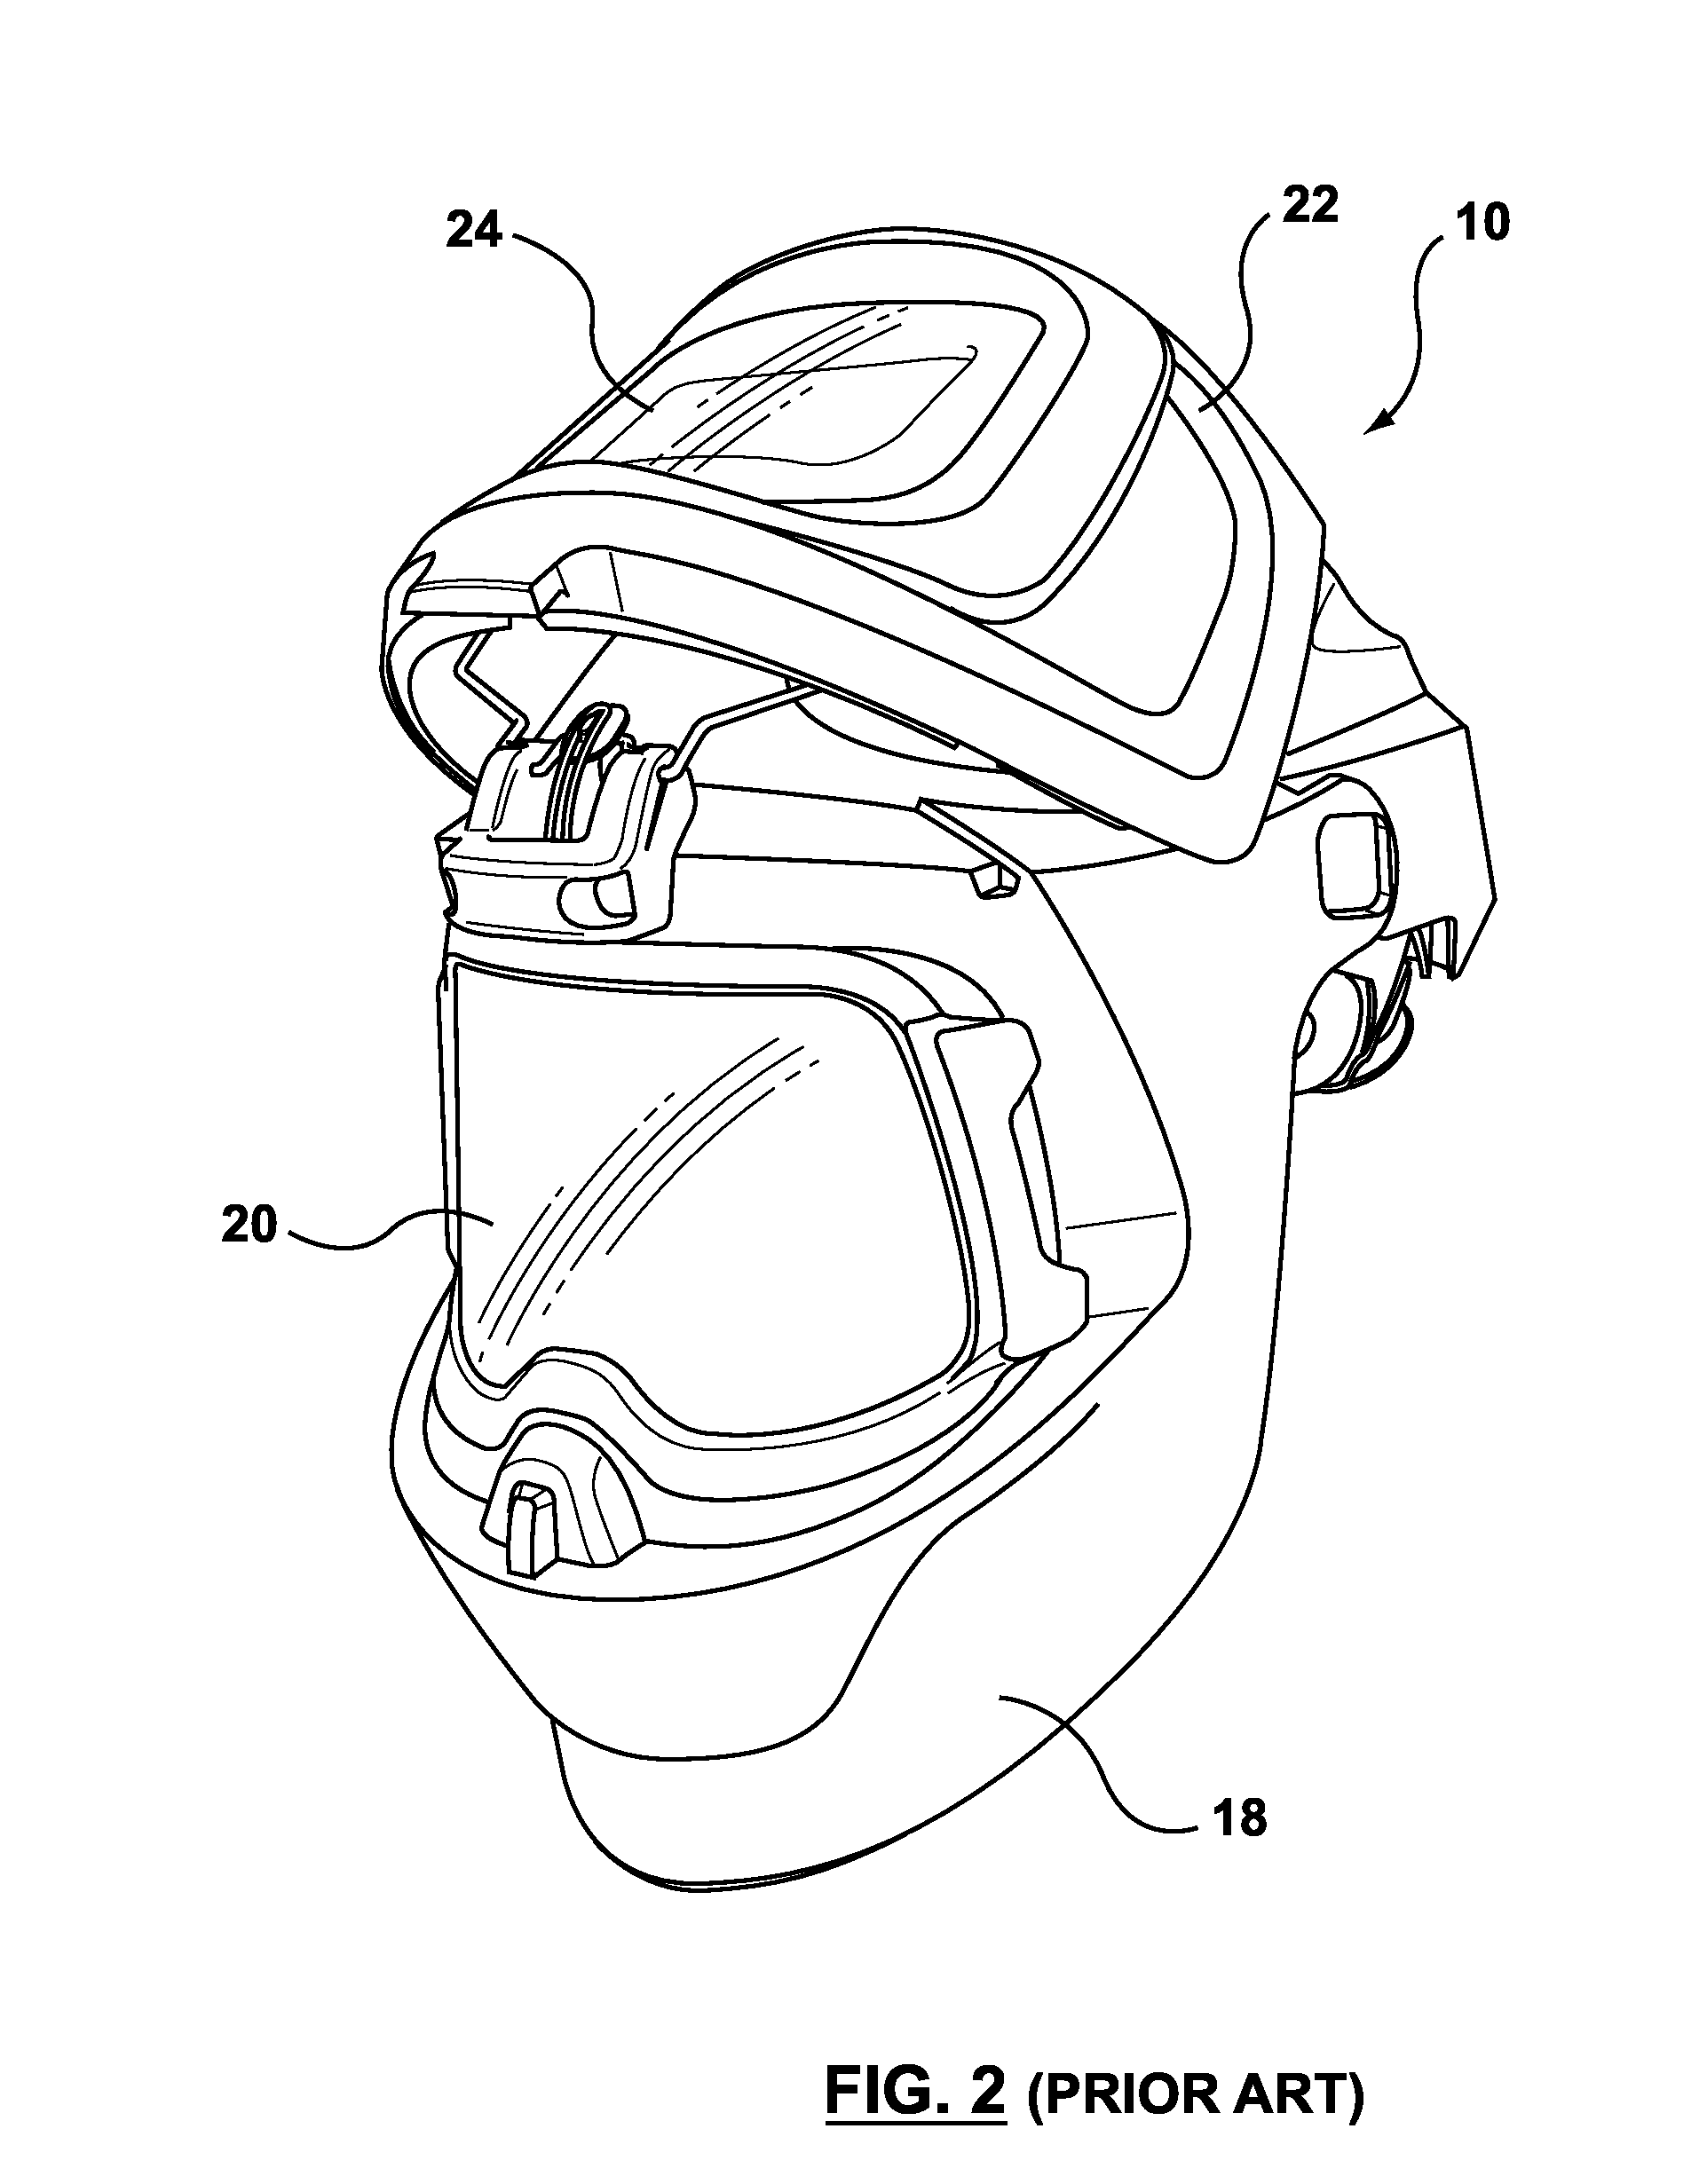 Protective shroud for a welding helmet, kits and helmets including the same